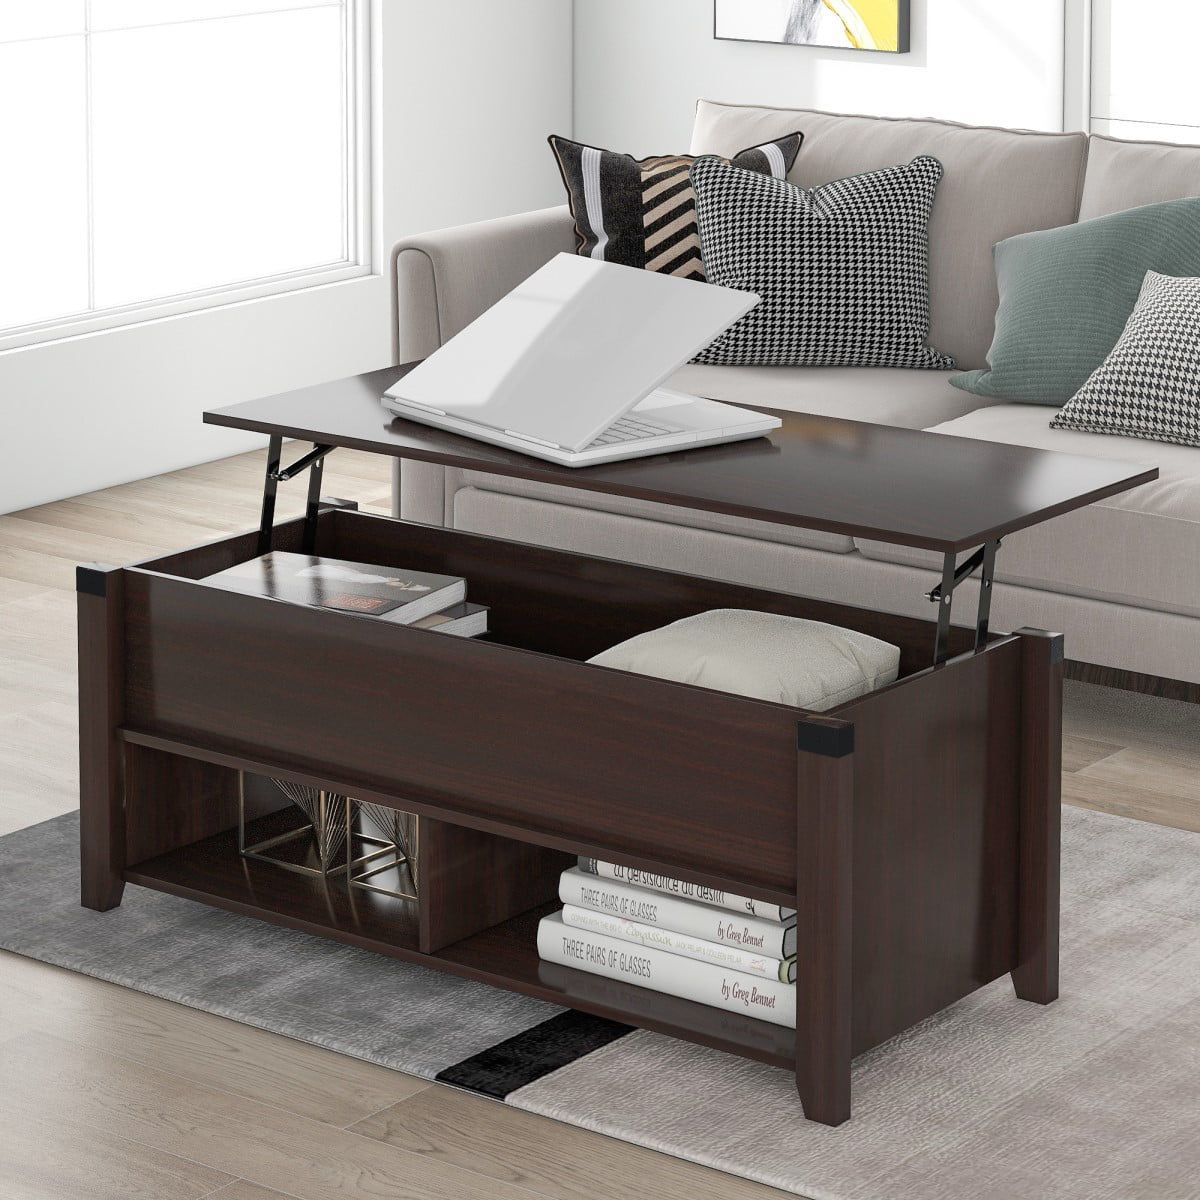 Small Space Lift Top Coffee Table With 2 Storage Compartments, Espresso For Lift Top Coffee Tables With Hidden Storage Compartments (Gallery 9 of 20)